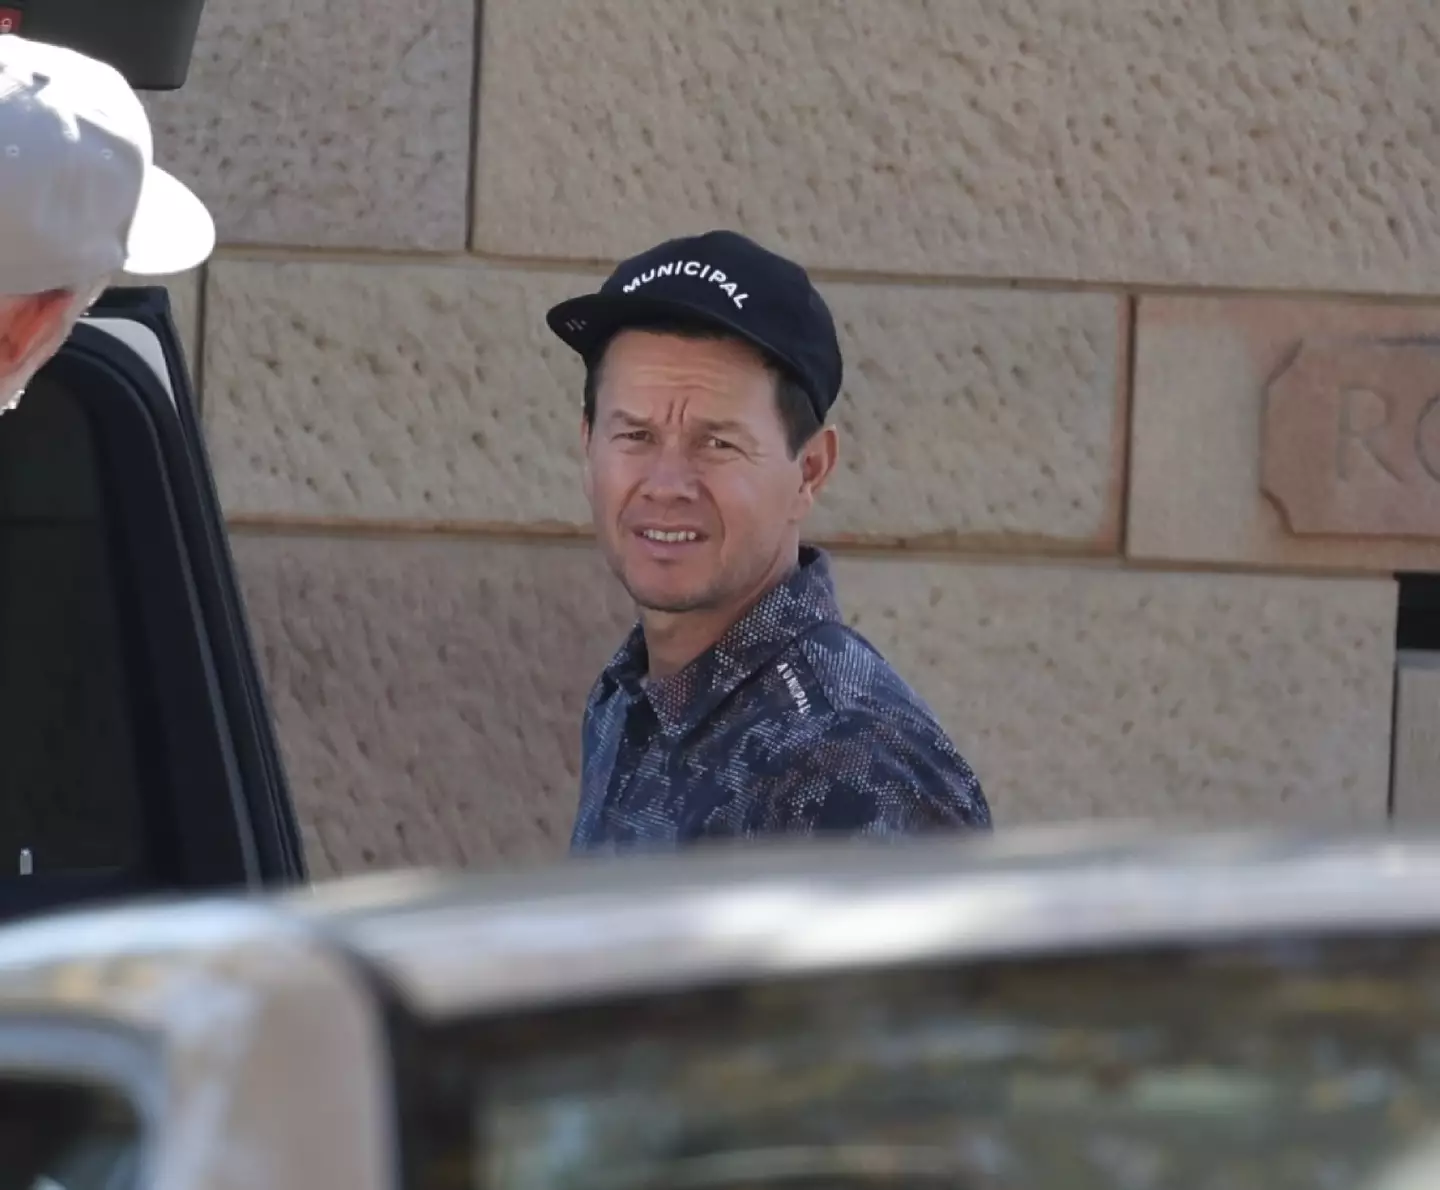 Mark Wahlberg is among those being sued by Beckham's company. (MEGA/GC Images)